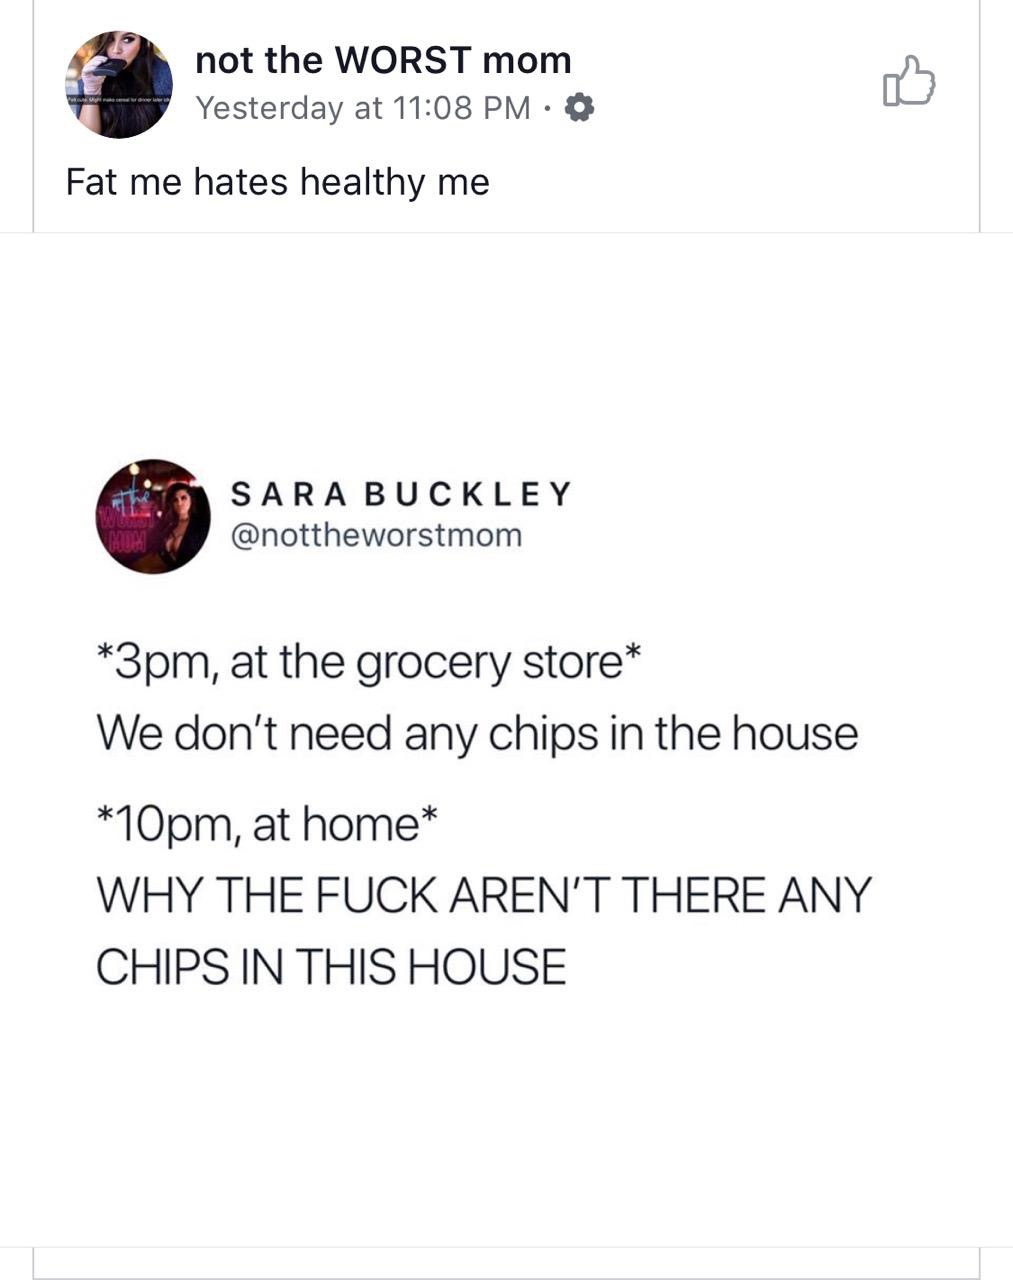 angle - not the Worst mom Yesterday at 0 Fat me hates healthy me Sara Buckley 3pm, at the grocery store We don't need any chips in the house 10pm, at home Why The Fuck Aren'T There Any Chips In This House